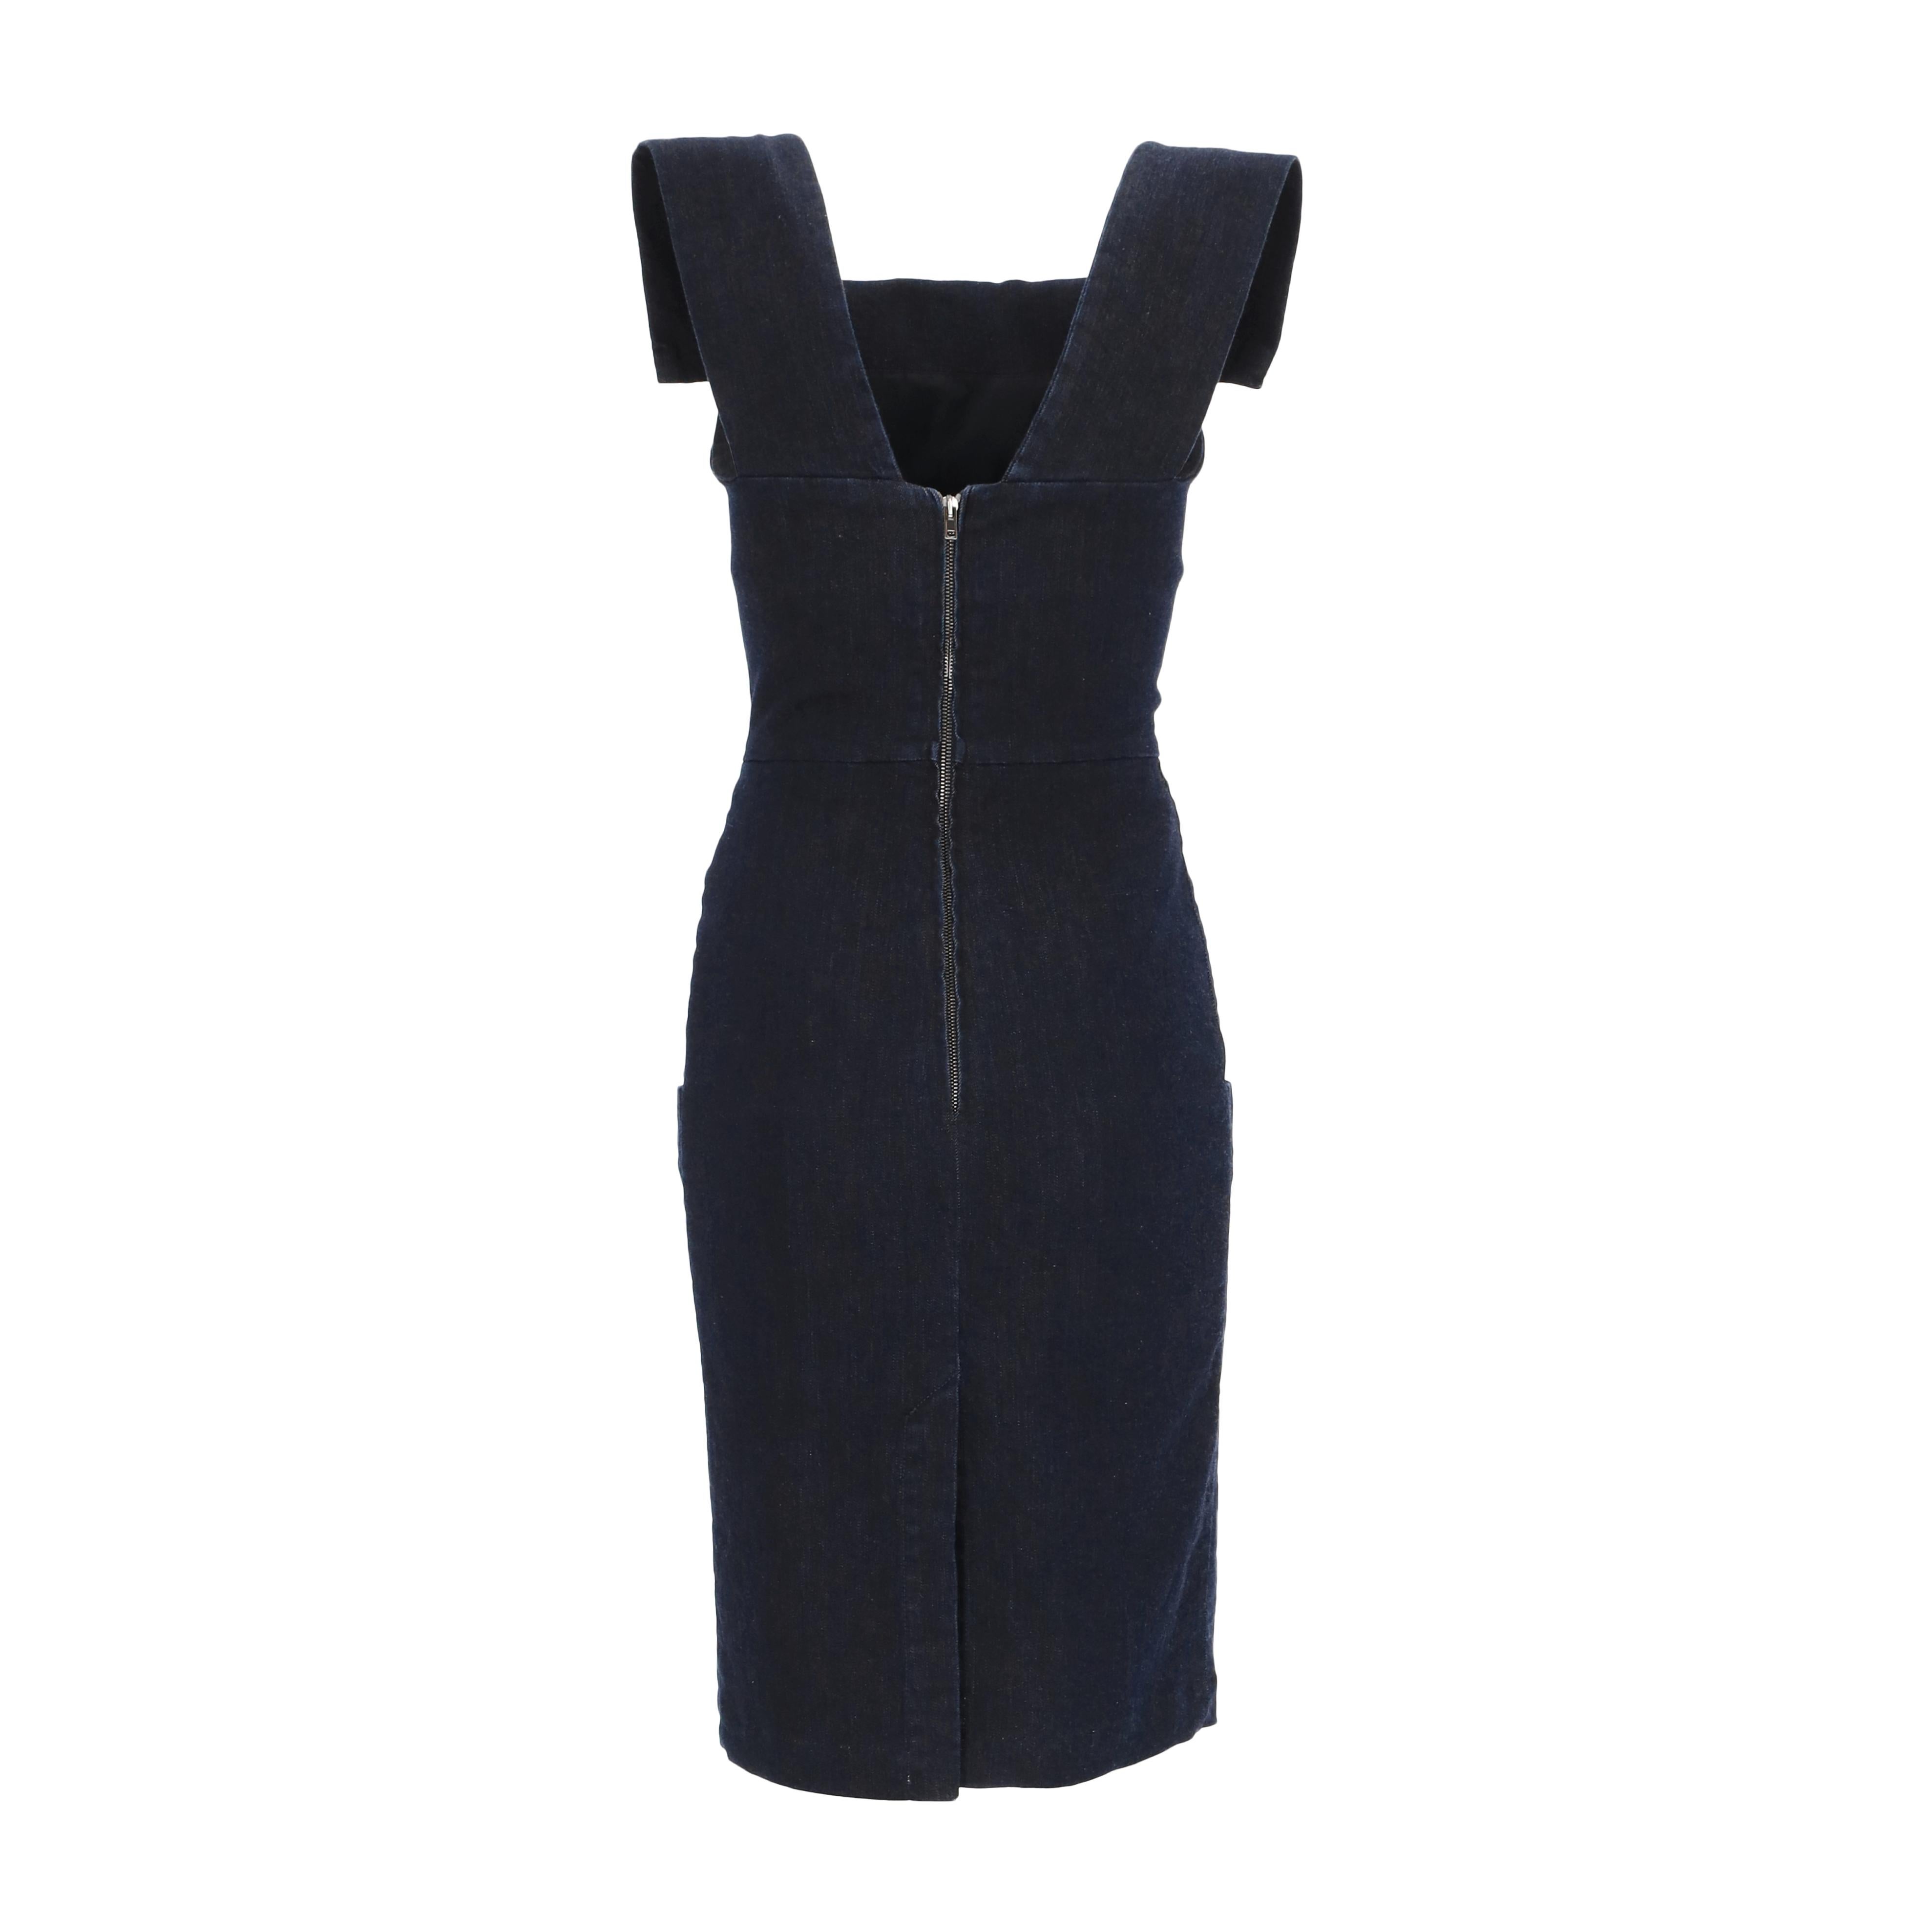 This Vivienne Westwood Anglomania dress is cut to a fitted silhouette and crafted from dark denim fabric. It features box shoulders and a folded neckline that extends to the back in a V shape. The back has a zippered closure and a small slit at the